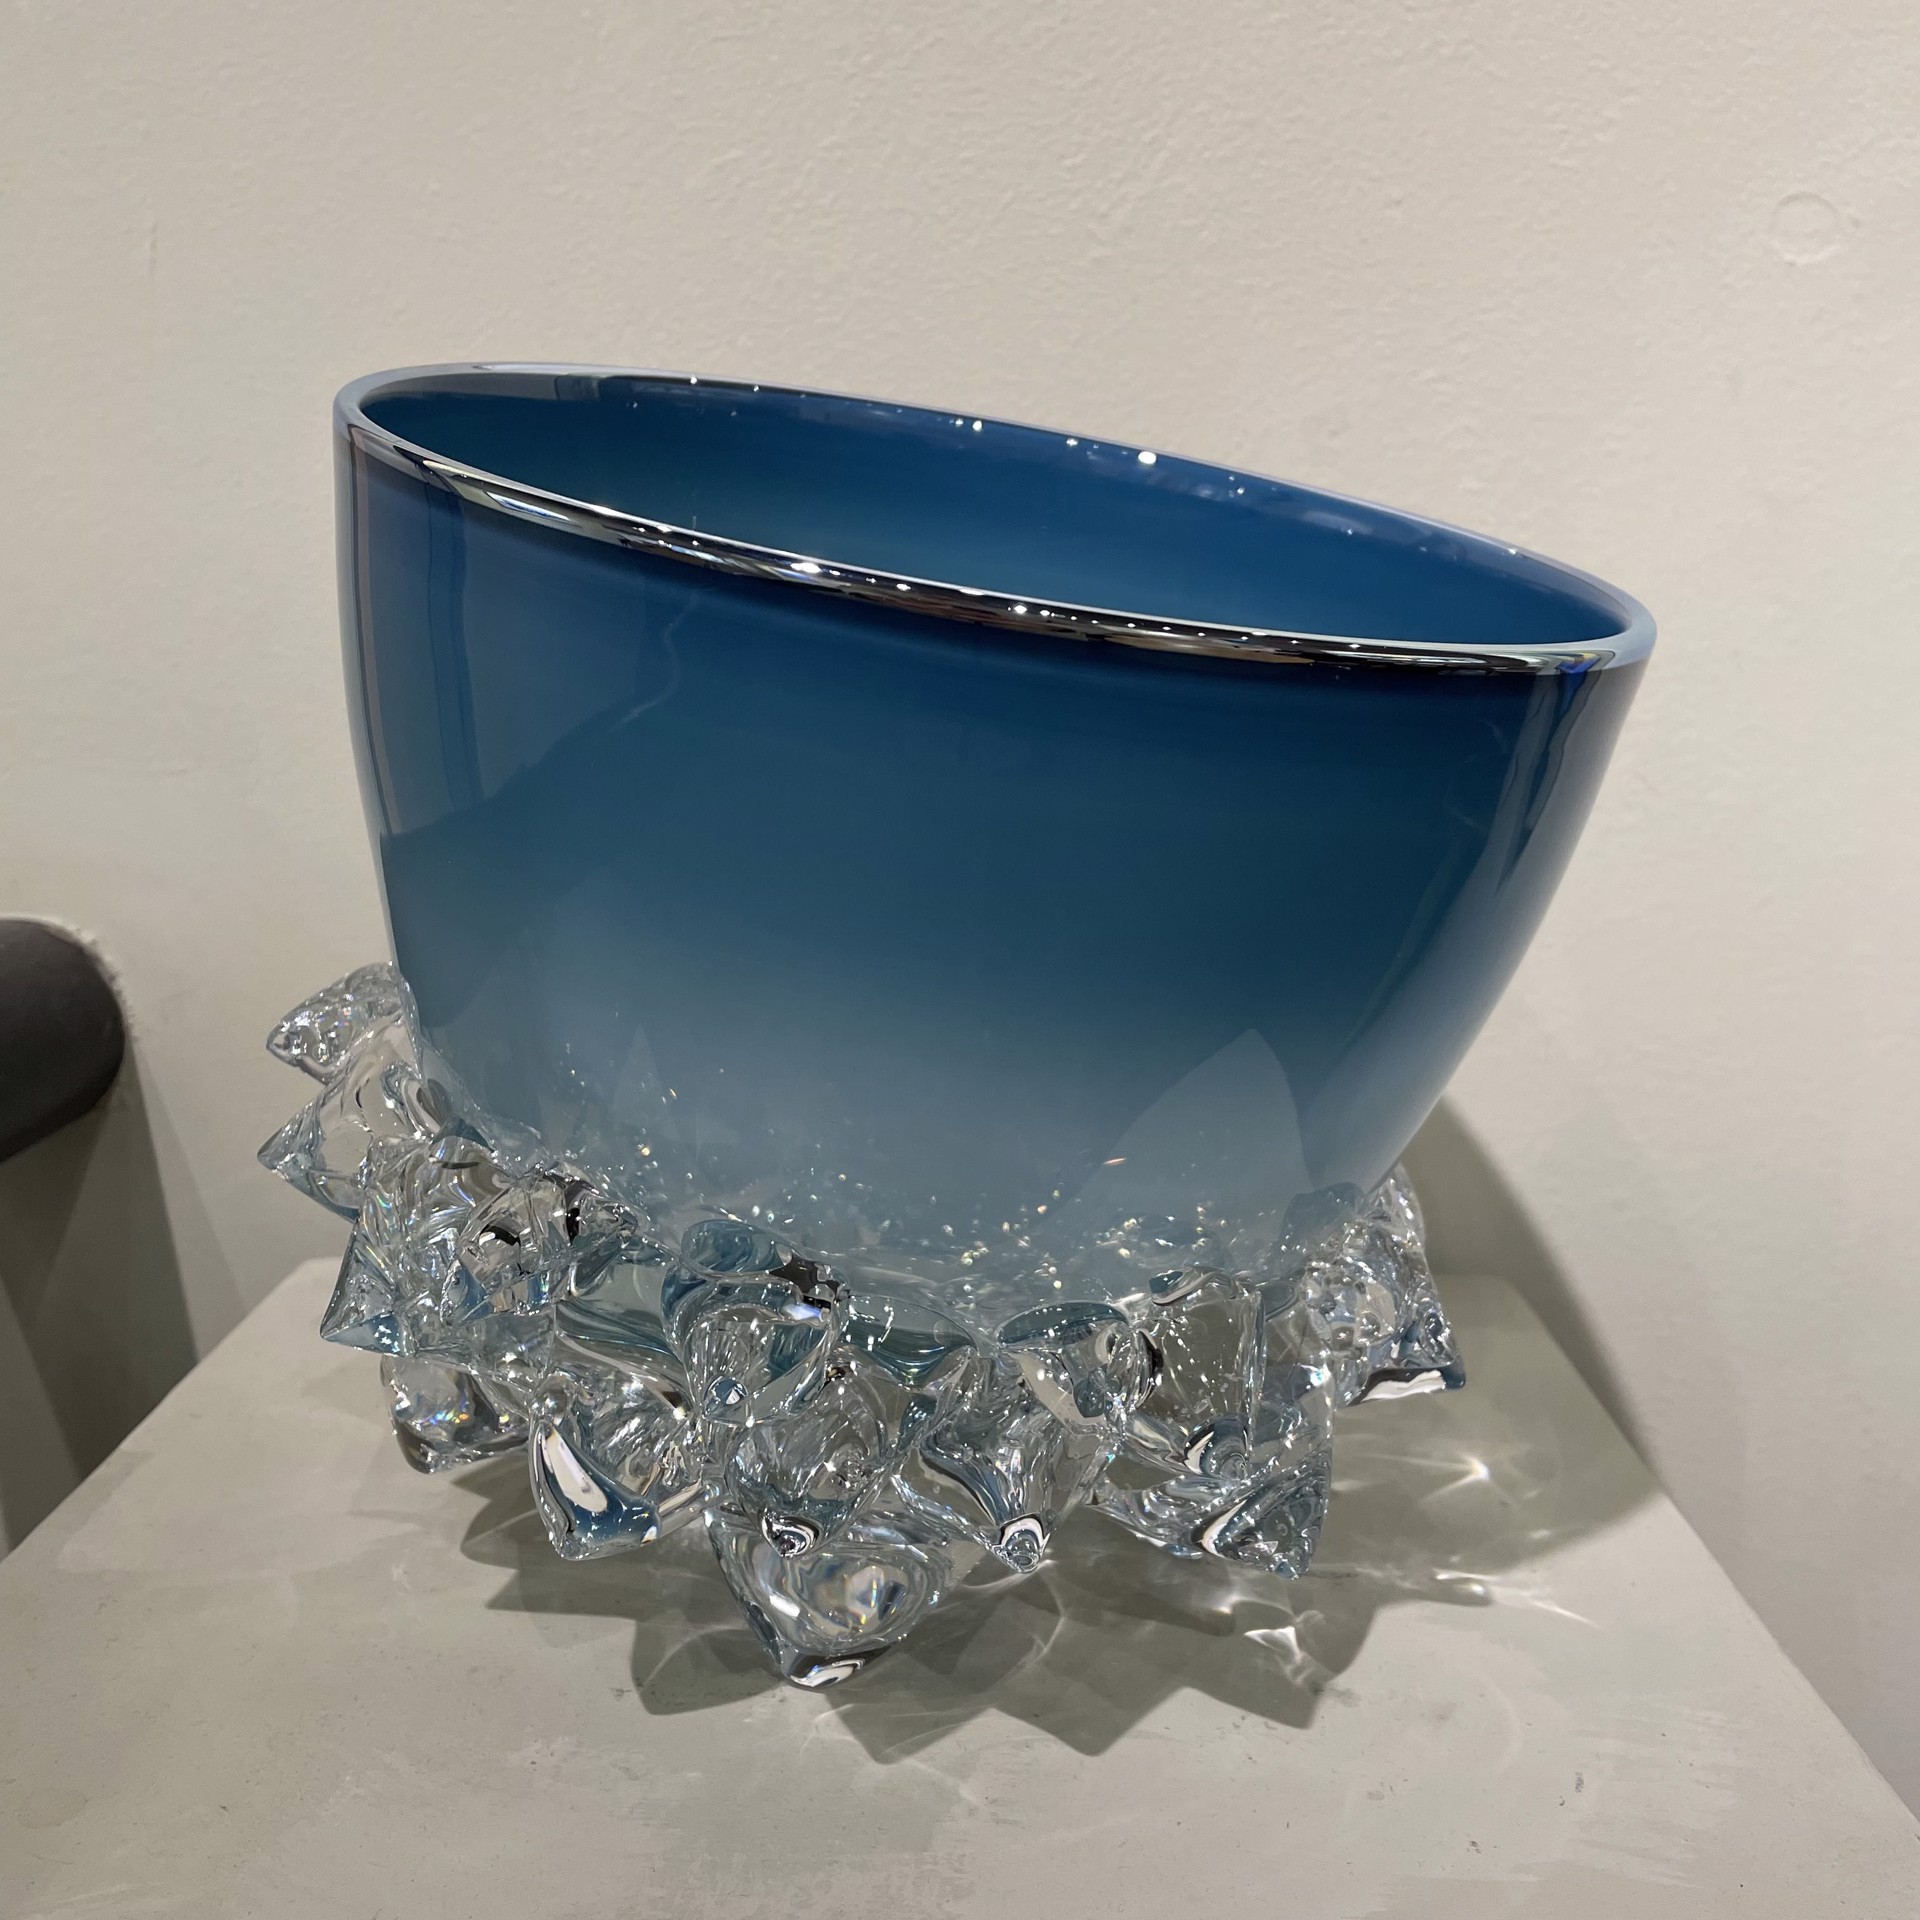 Thorn Vessel Opal Blue by Andrew Madvin